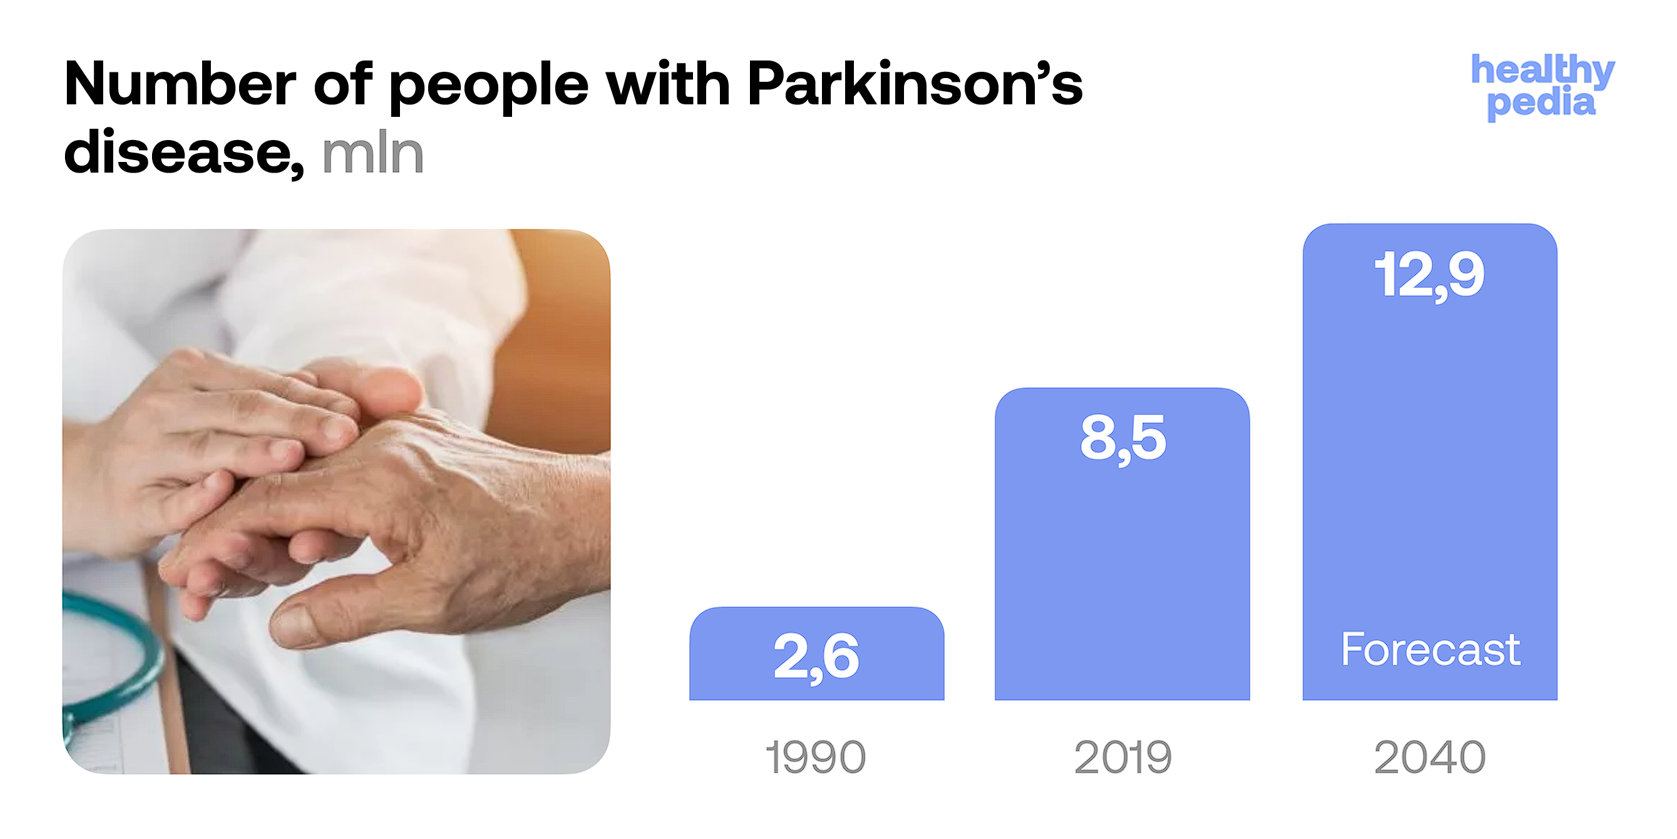 Number of people with Parkinson's disease, mln. stats